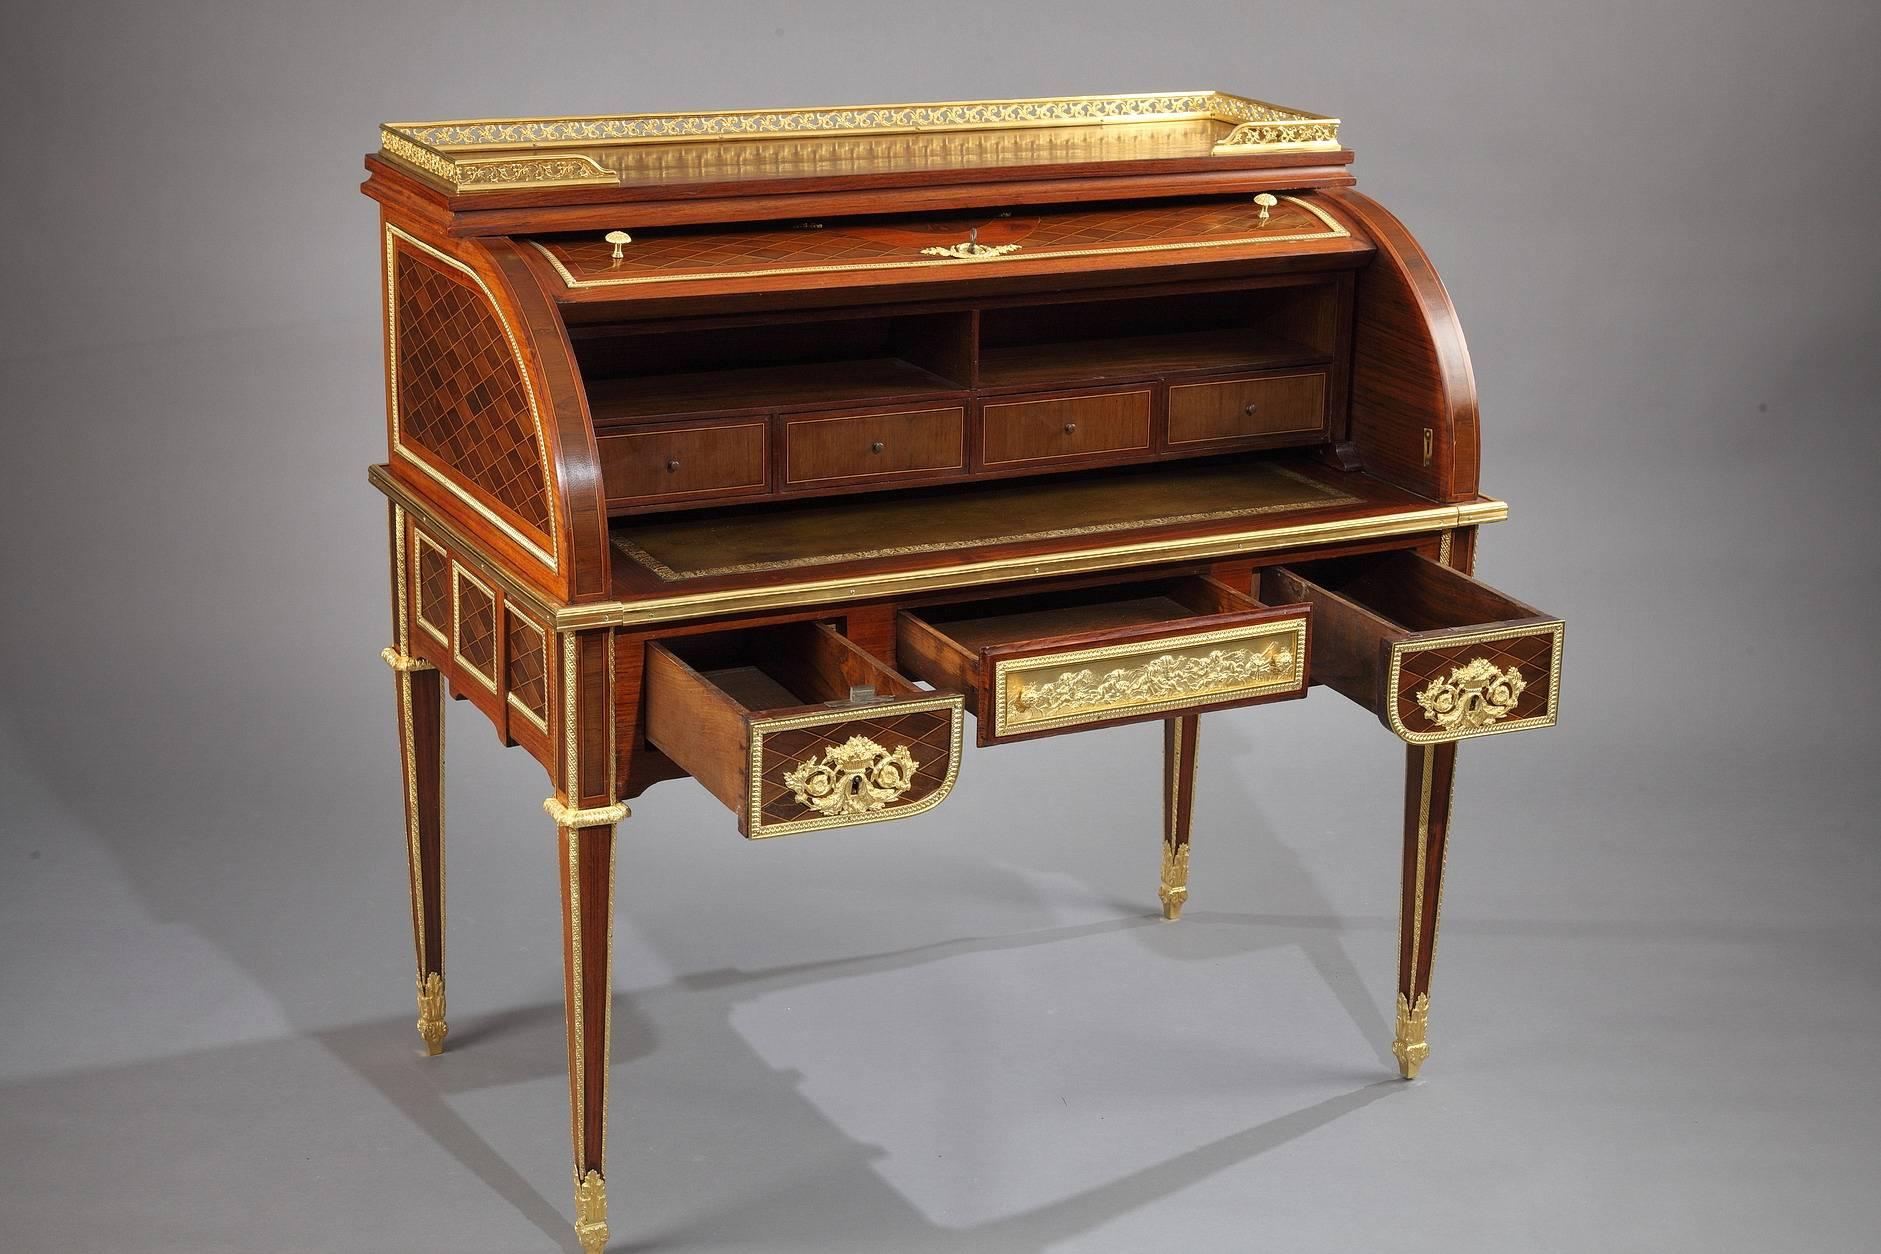 Louis XVI style rolltop writing desk with marquetry latticework pattern. The front of the desk features three drawers that are 16.5 in (42 cm) deep. The rolling cover is embellished with a large marquetry medallion featuring symbols of Poetry. It